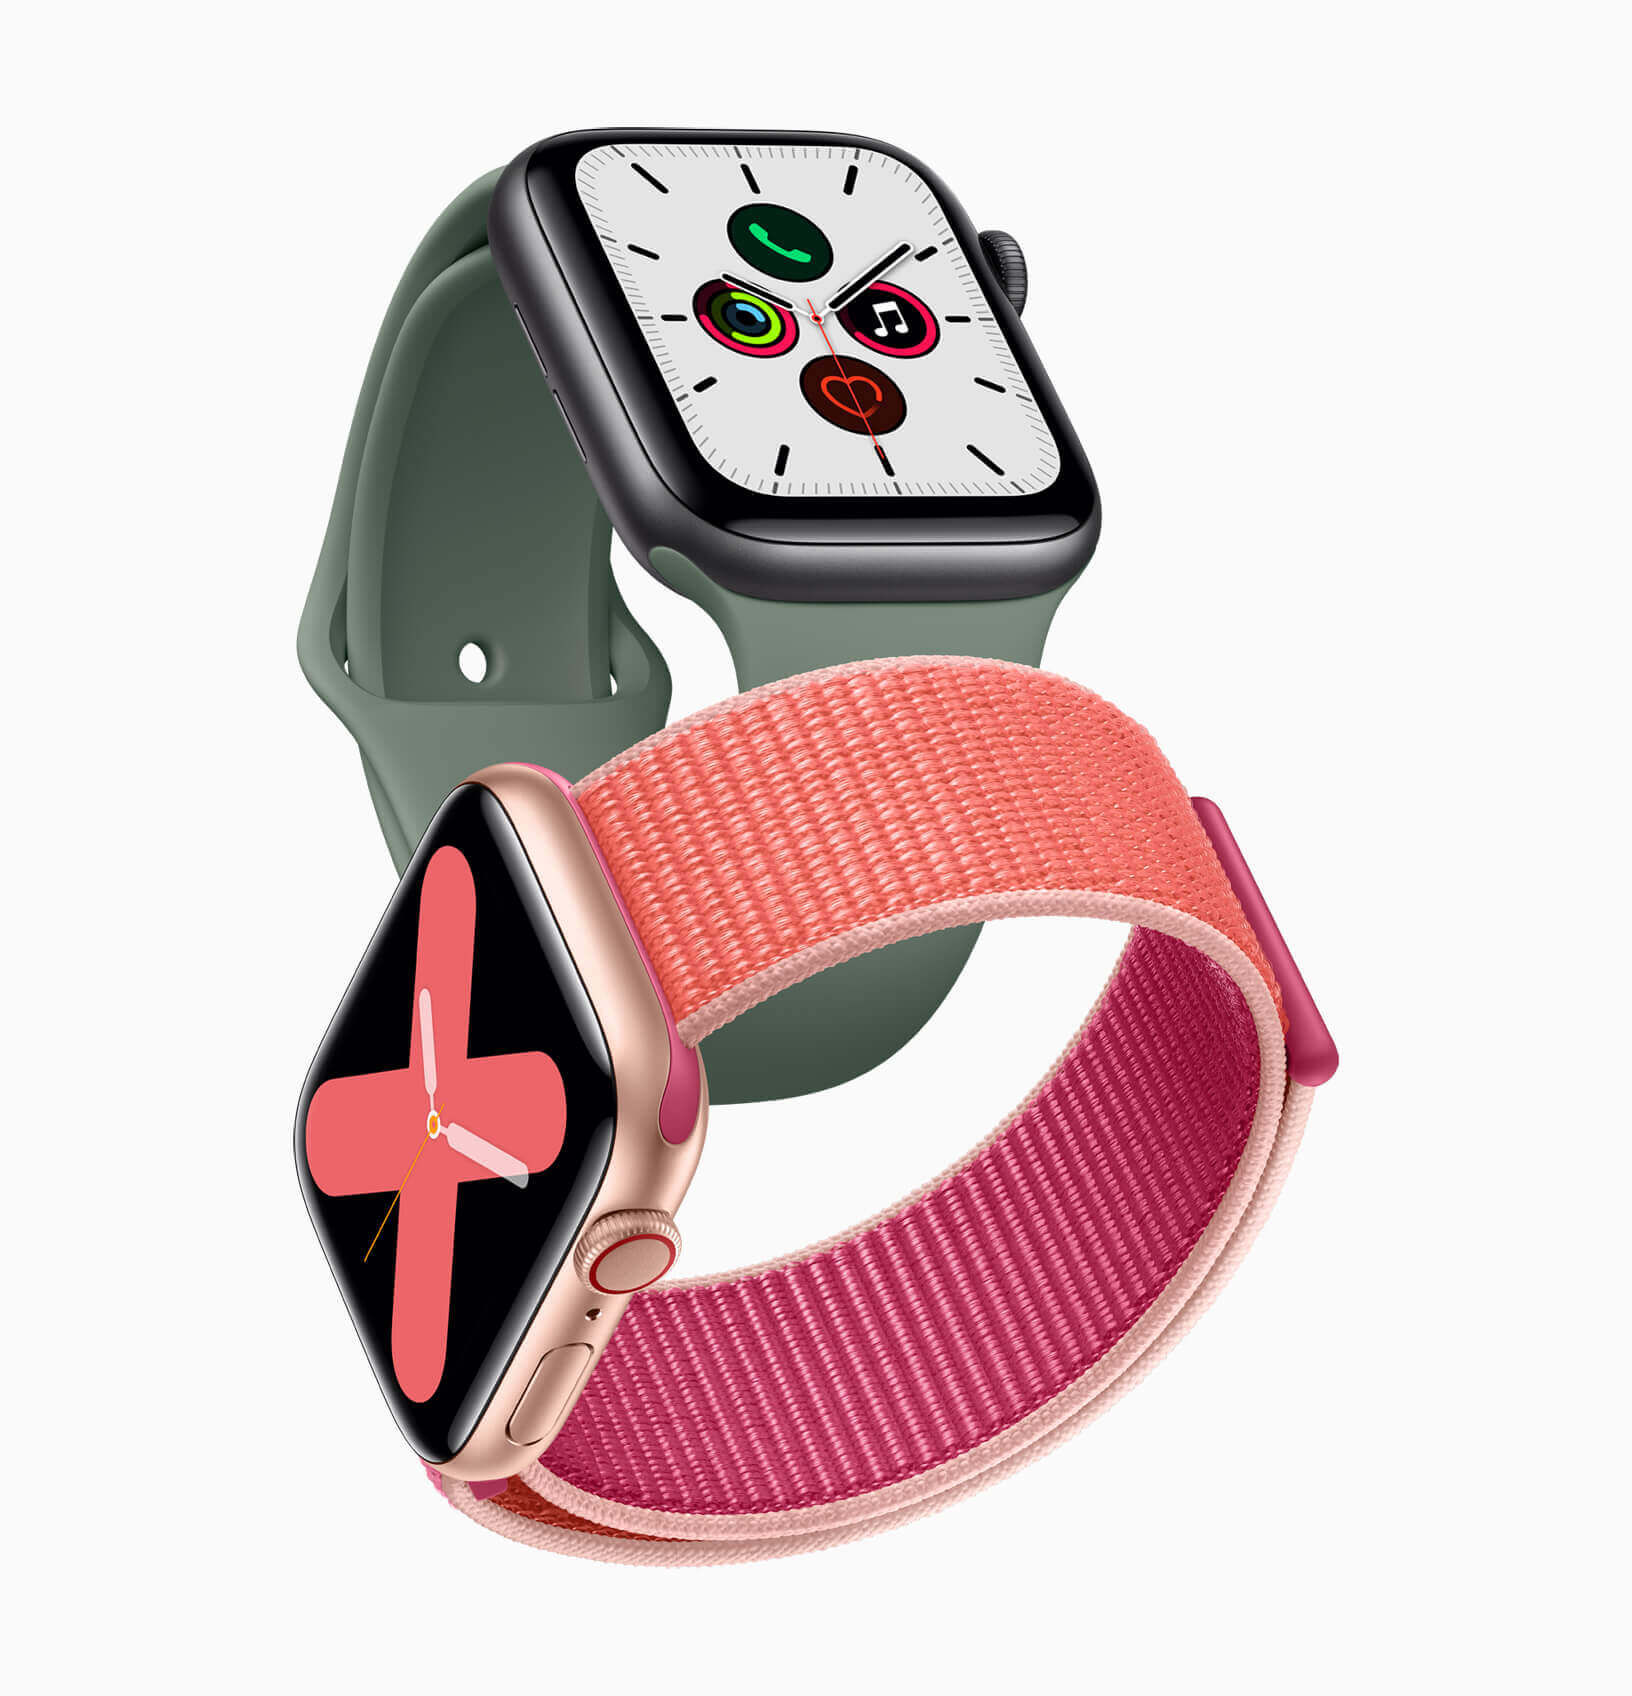 Apple_watch_series_5-gold-aluminum-case-pomegranate-band-and-space-gray-aluminum-case-pine-green-band-091019_1